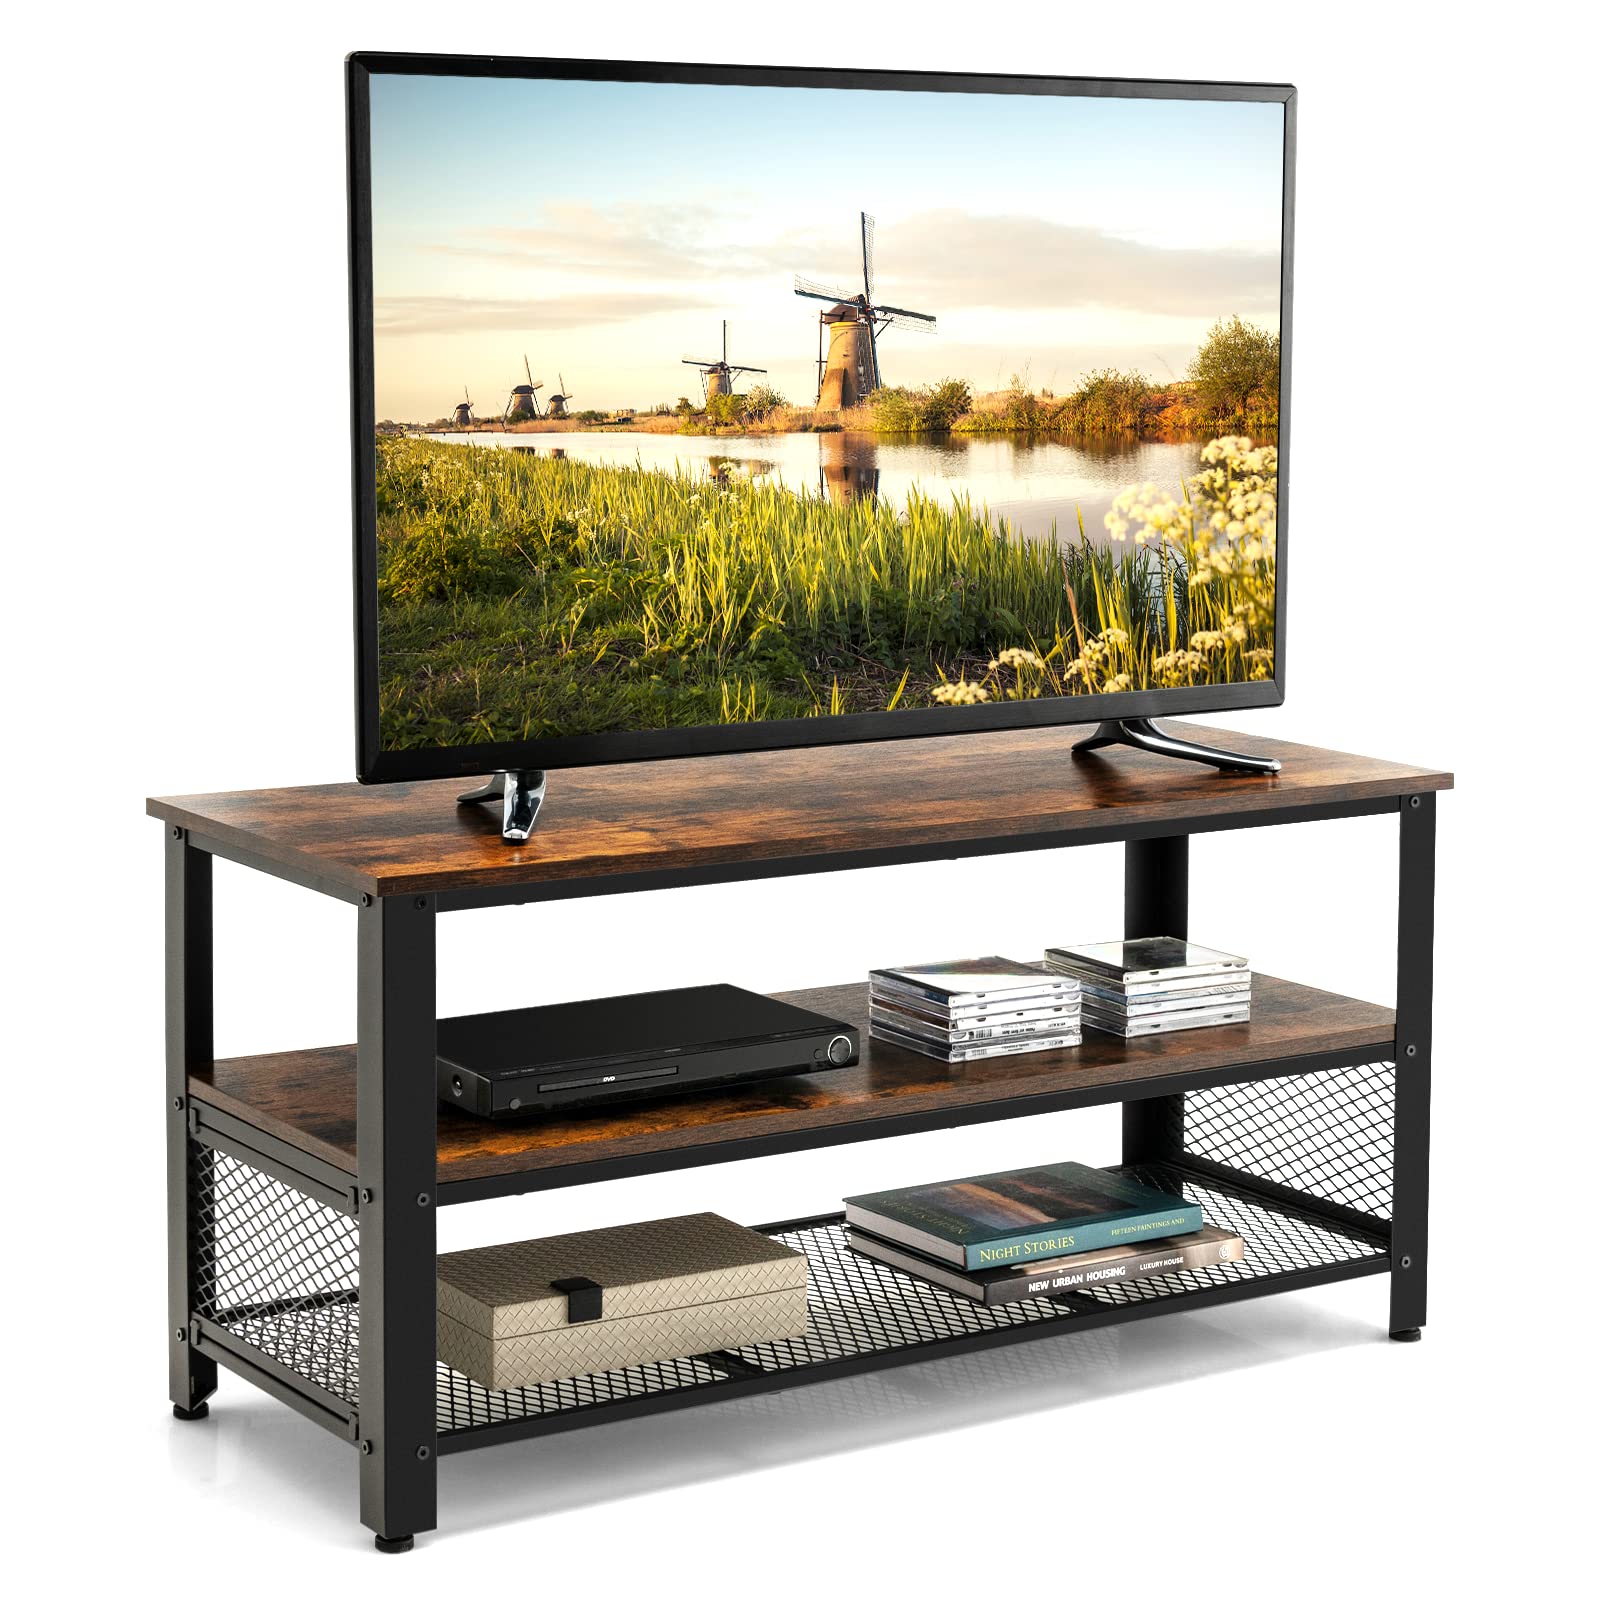 Giantex TV Stand for TV up to 50 Inches, 43.5 inch Wood Industrial TV Cabinet with 3-Tier Storage Shelves, Rustic Brown